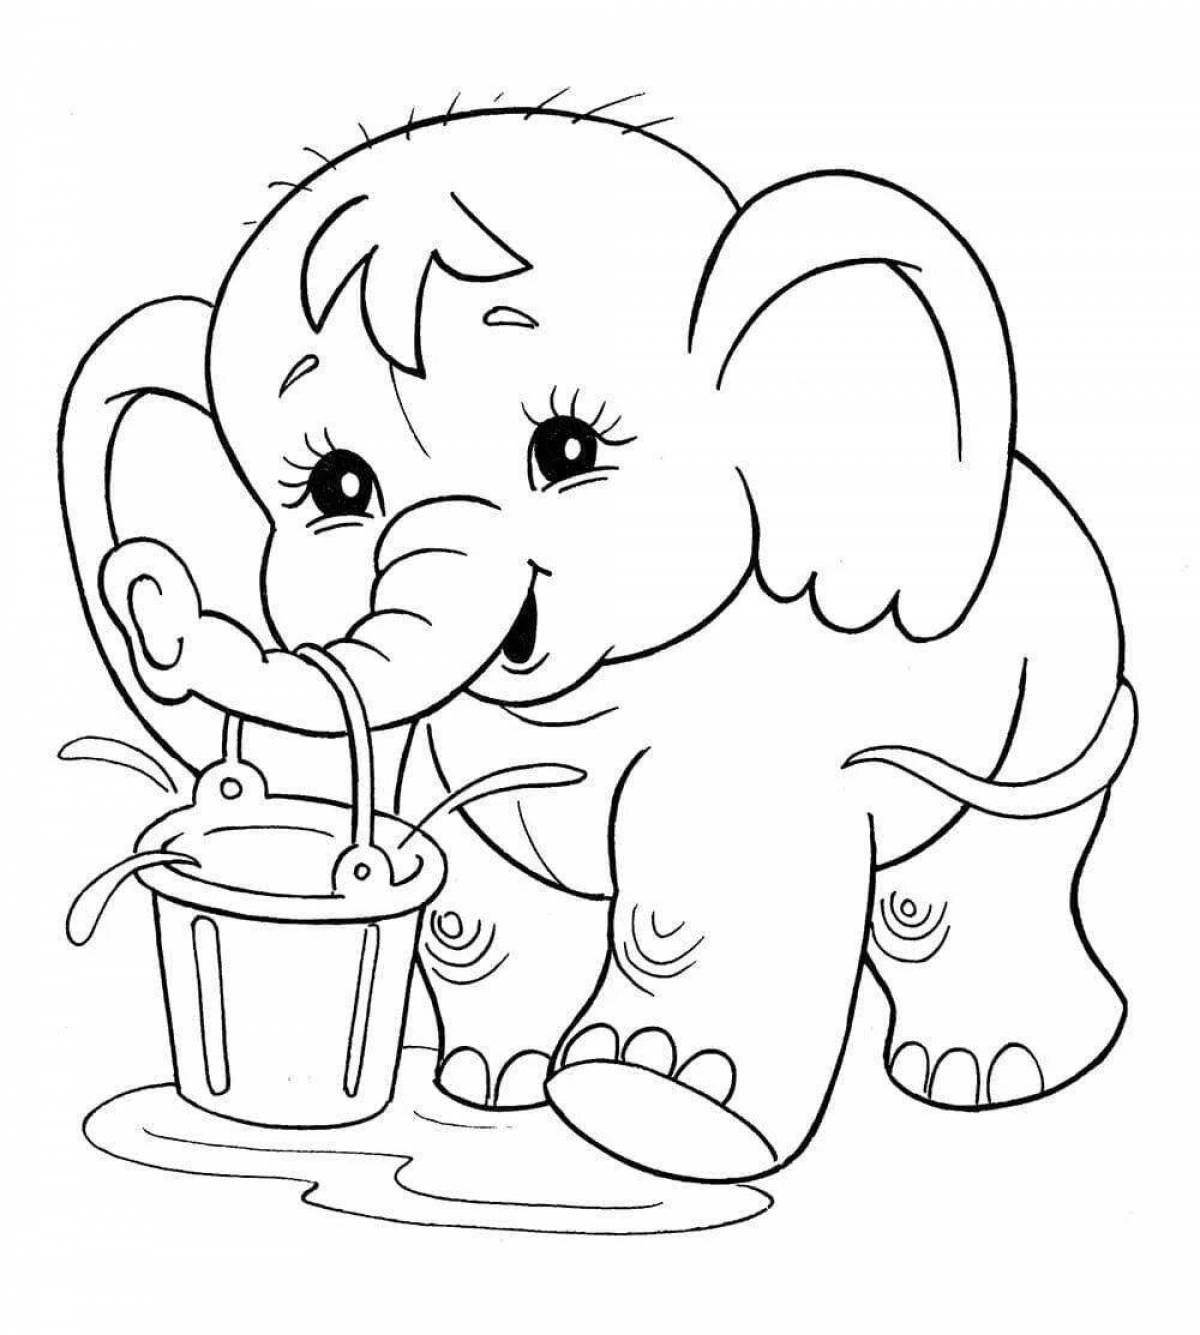 Cute animal coloring book for 5-6 year olds for girls